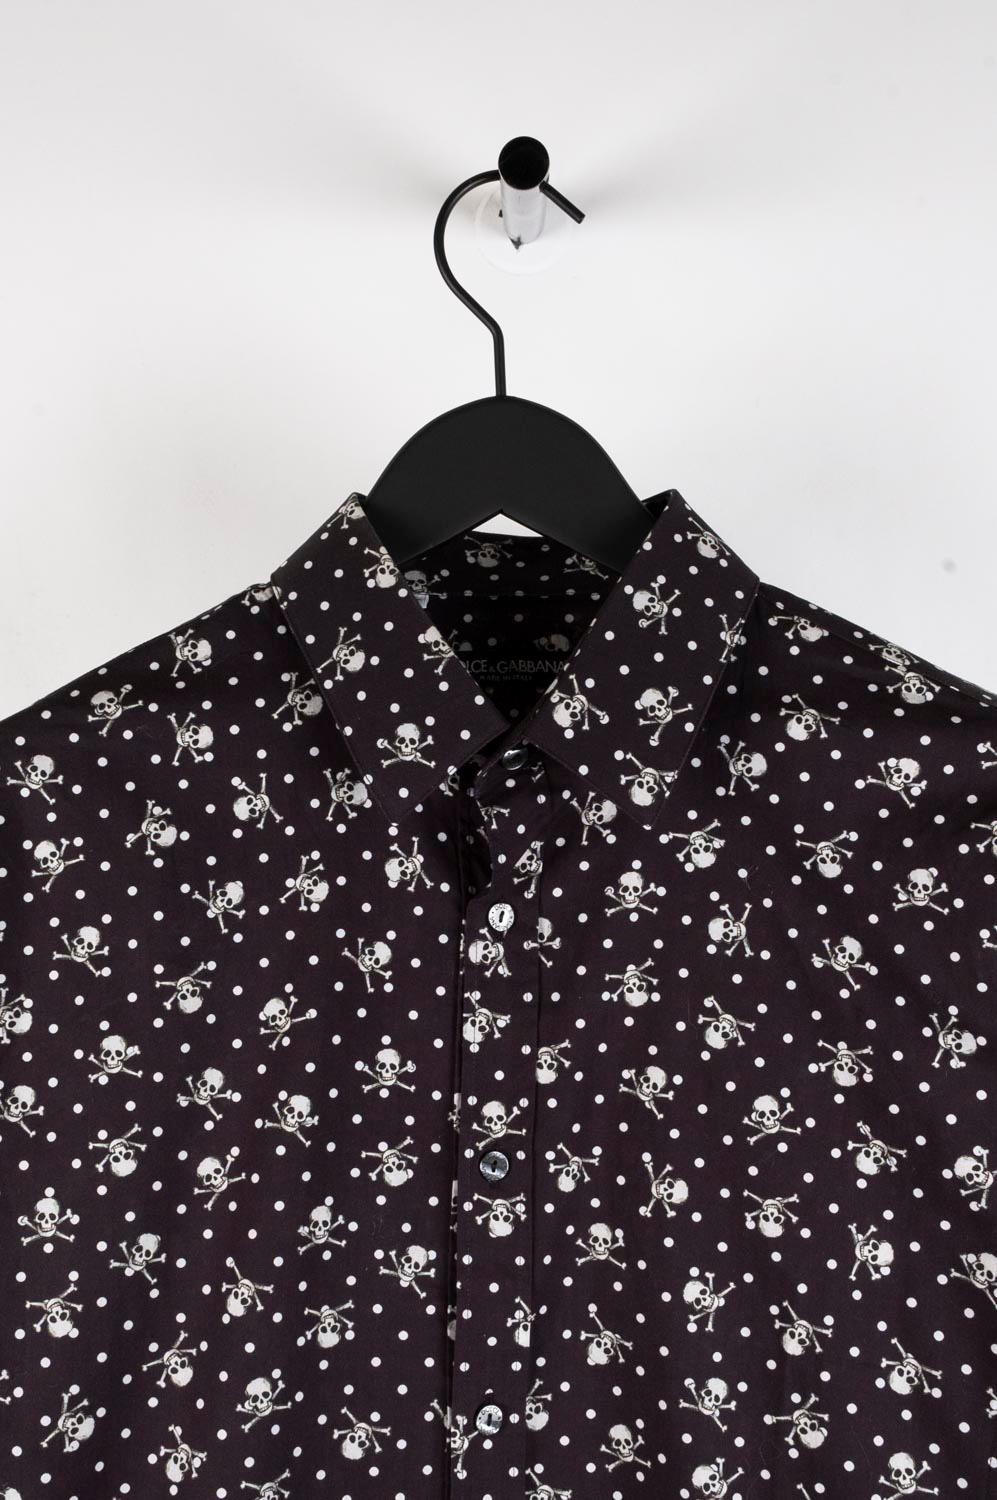 Item for sale is 100% genuine Dolce&Gabbana Skulls Print Men Shirt, S436
Color: Black
(An actual color may a bit vary due to individual computer screen interpretation)
Material: No care label, seems cotton
Tag size:15.75/40 goes for S/M
This shirt